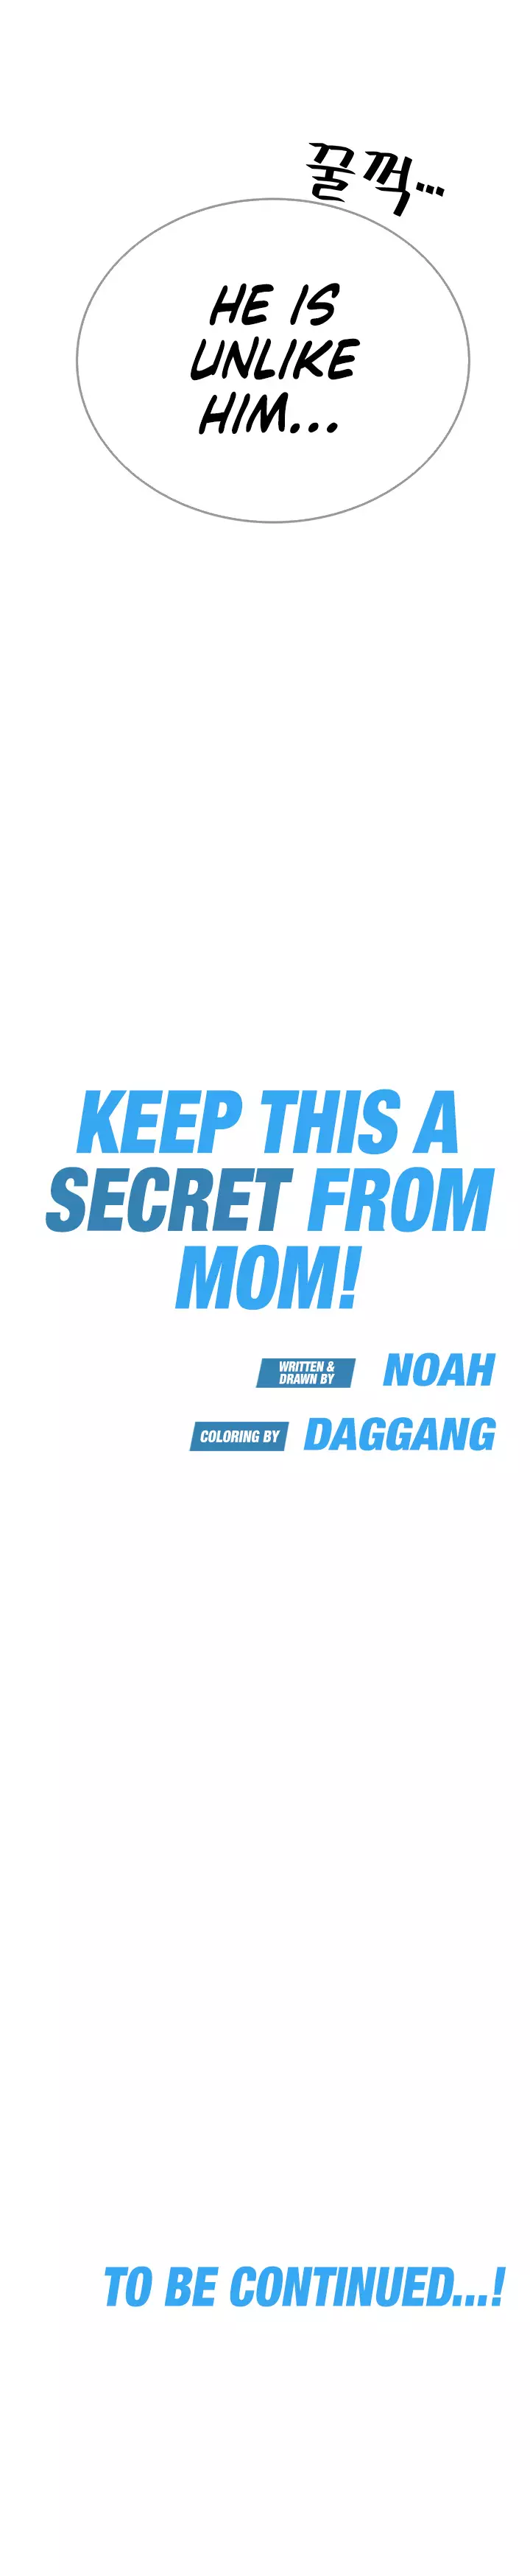 Keep This A Secret From Mom - 70 page 35-ce266b21